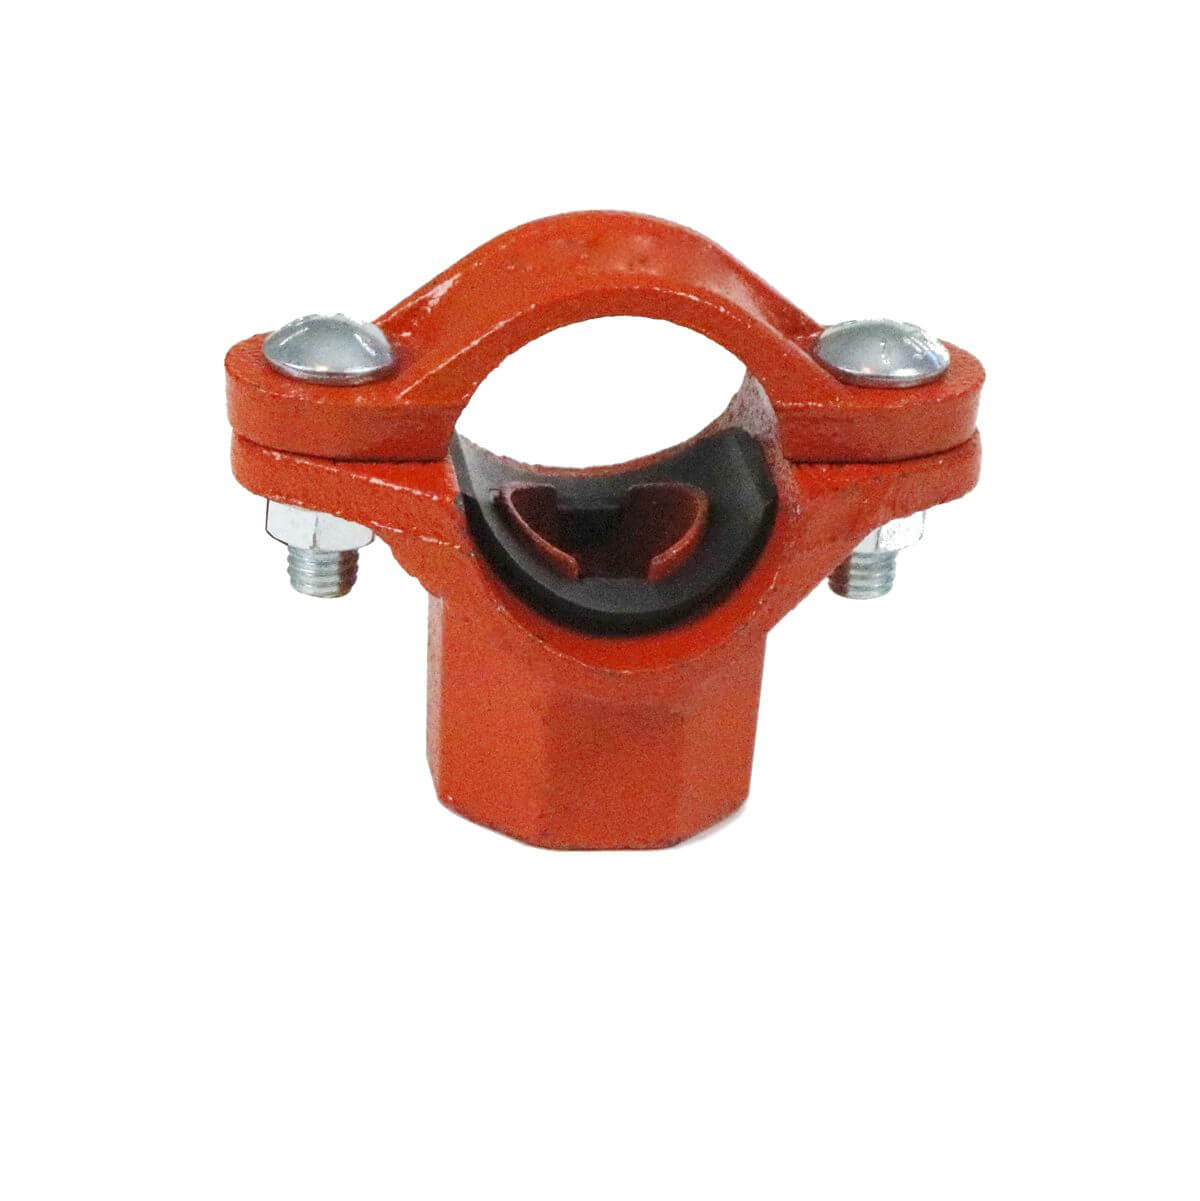 Tontr stainless steel Pipe Fitting Threaded Mechanical Tee for Fire Control